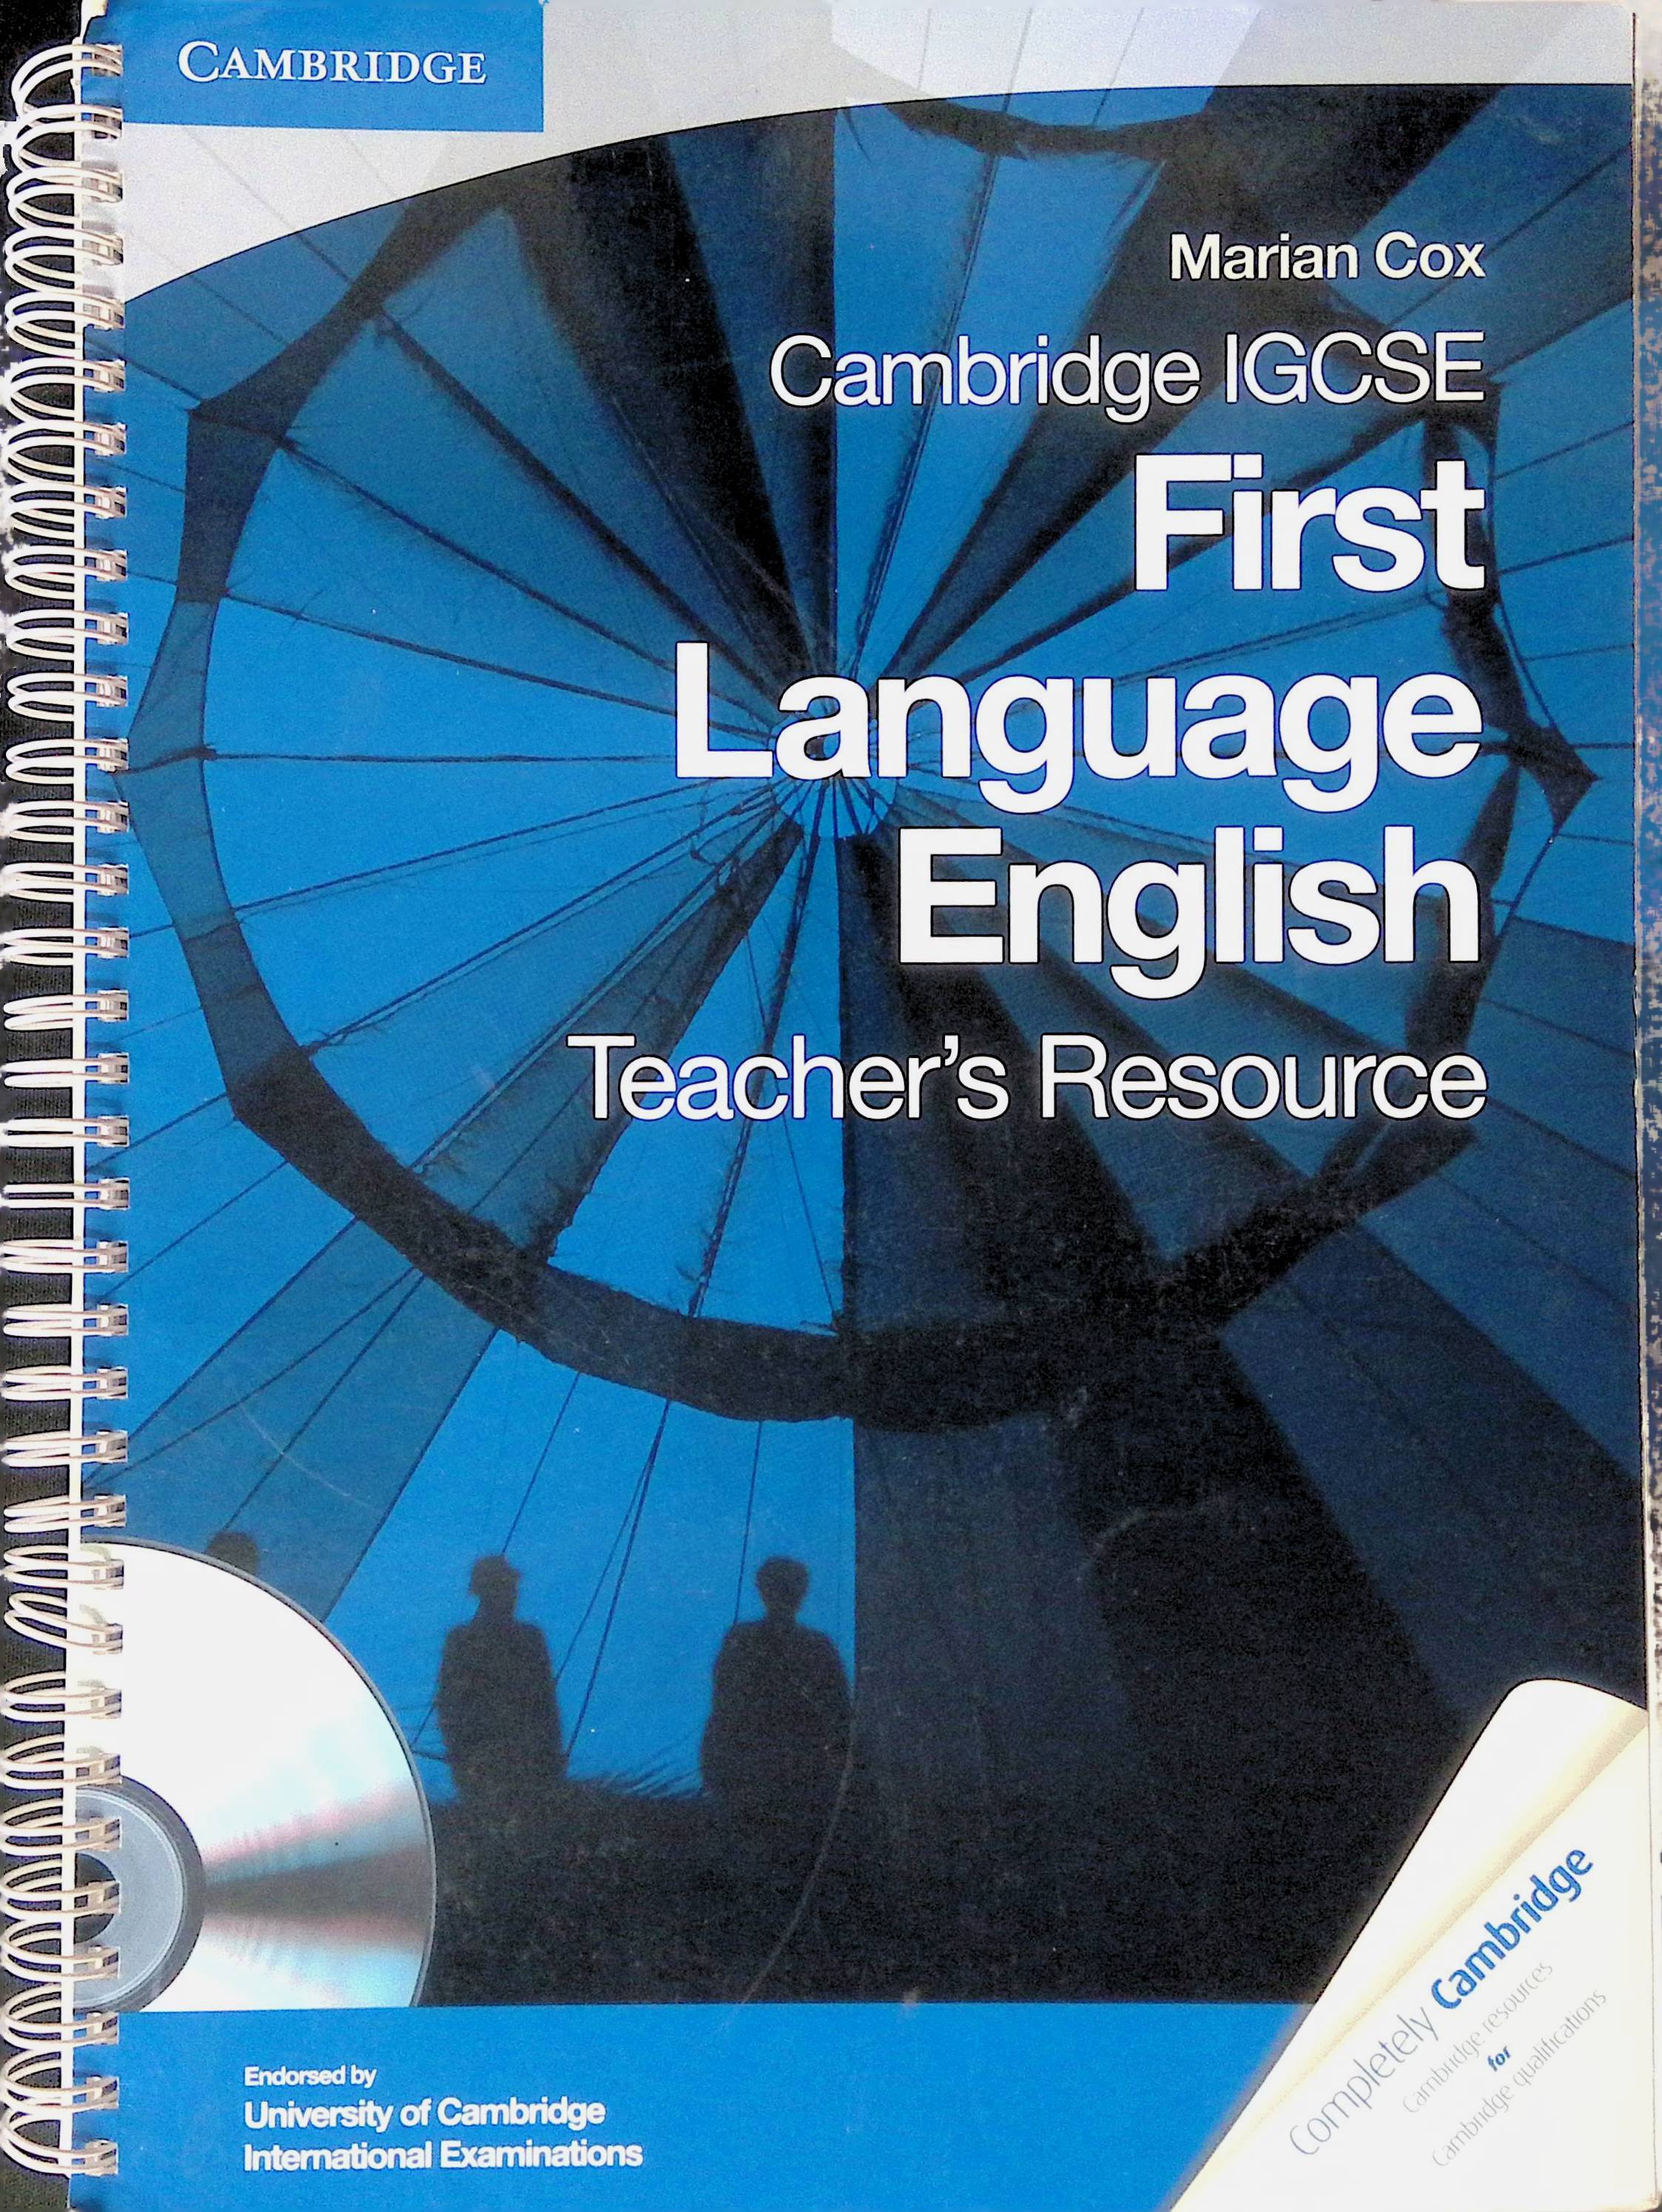 First language teaching. Cambridge English for Scientists. Recycling Intermediate English. Teaching English book Cover.